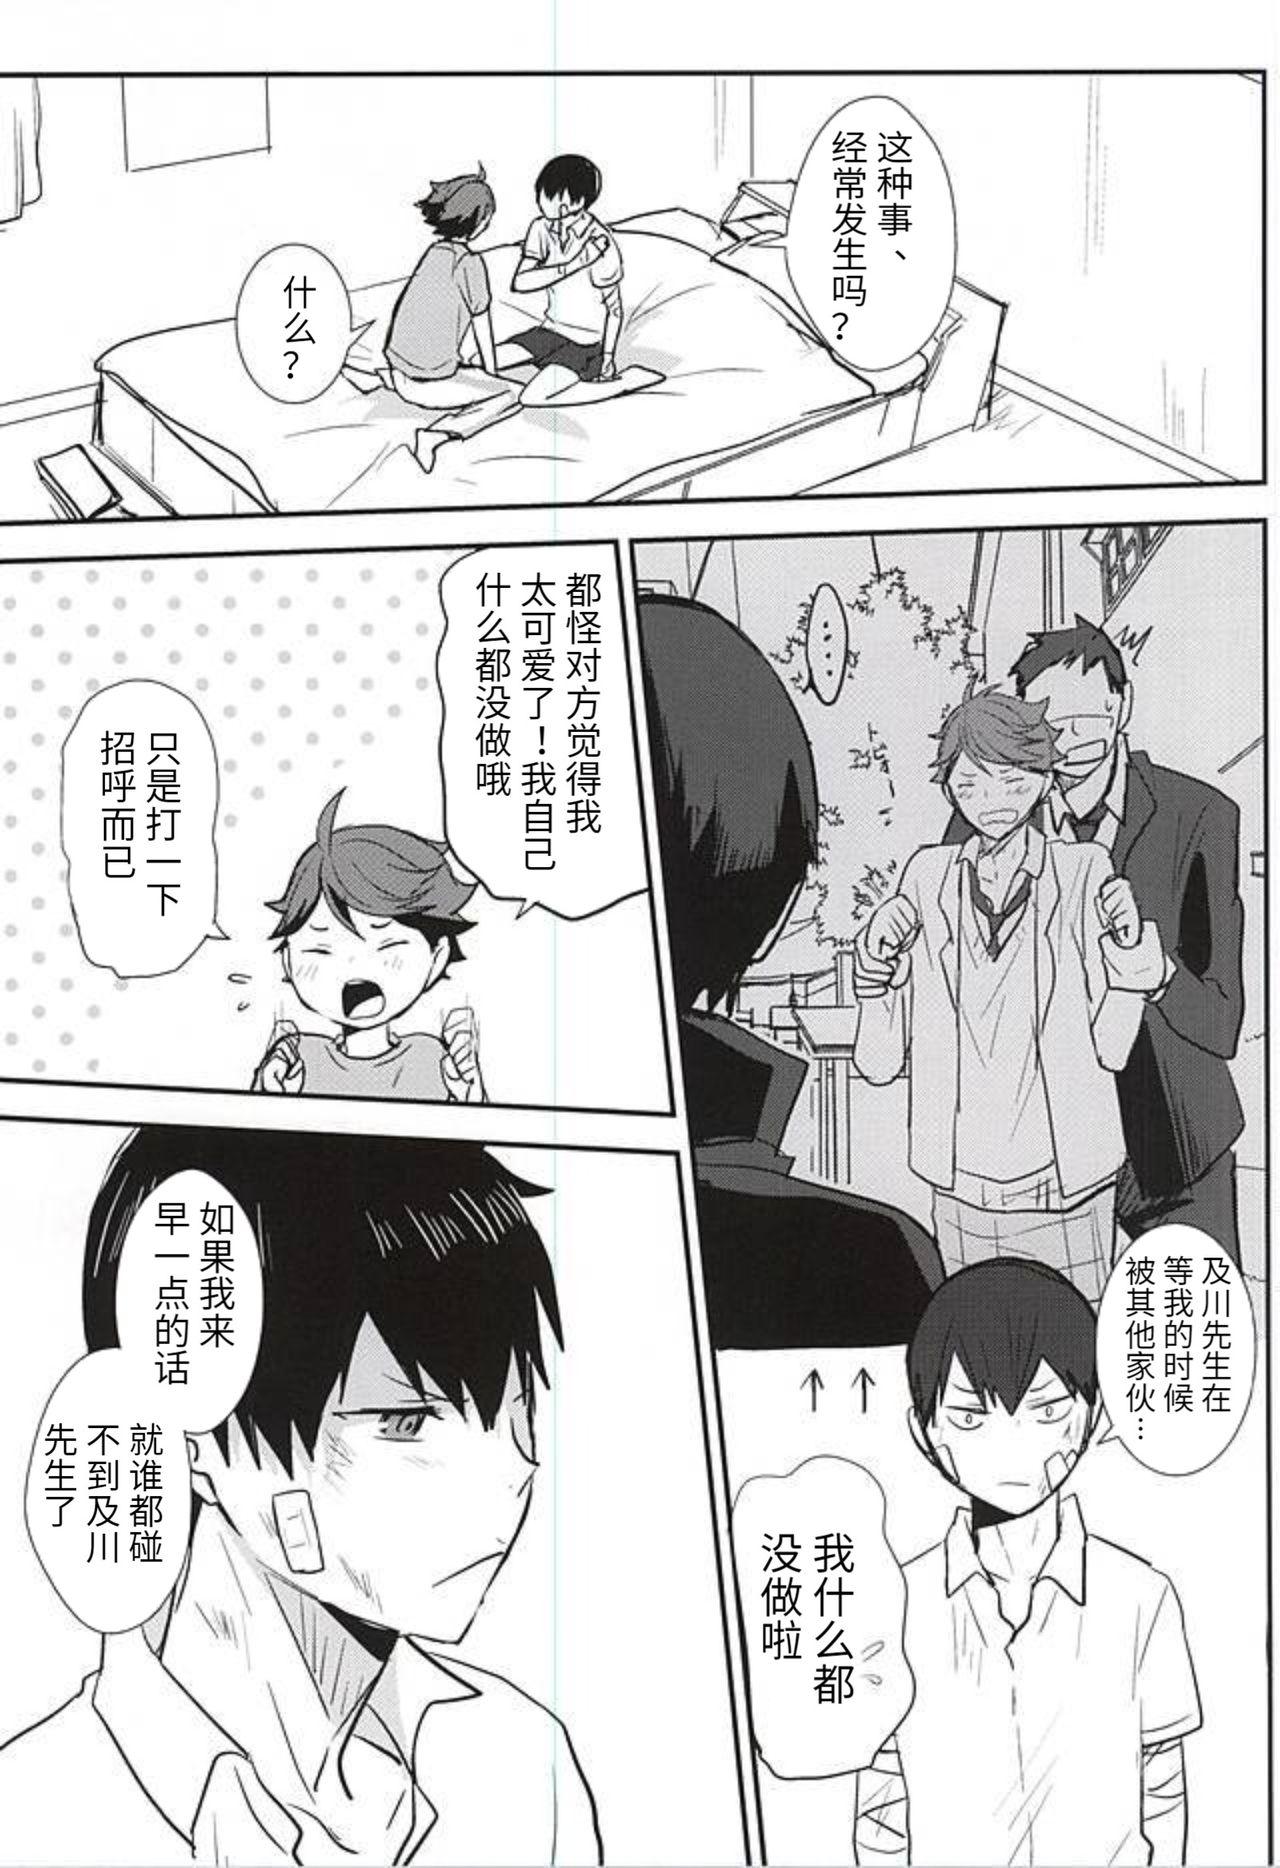 Cream 此名为爱 THIS THING CALLED LOVE - Haikyuu Firsttime - Page 11